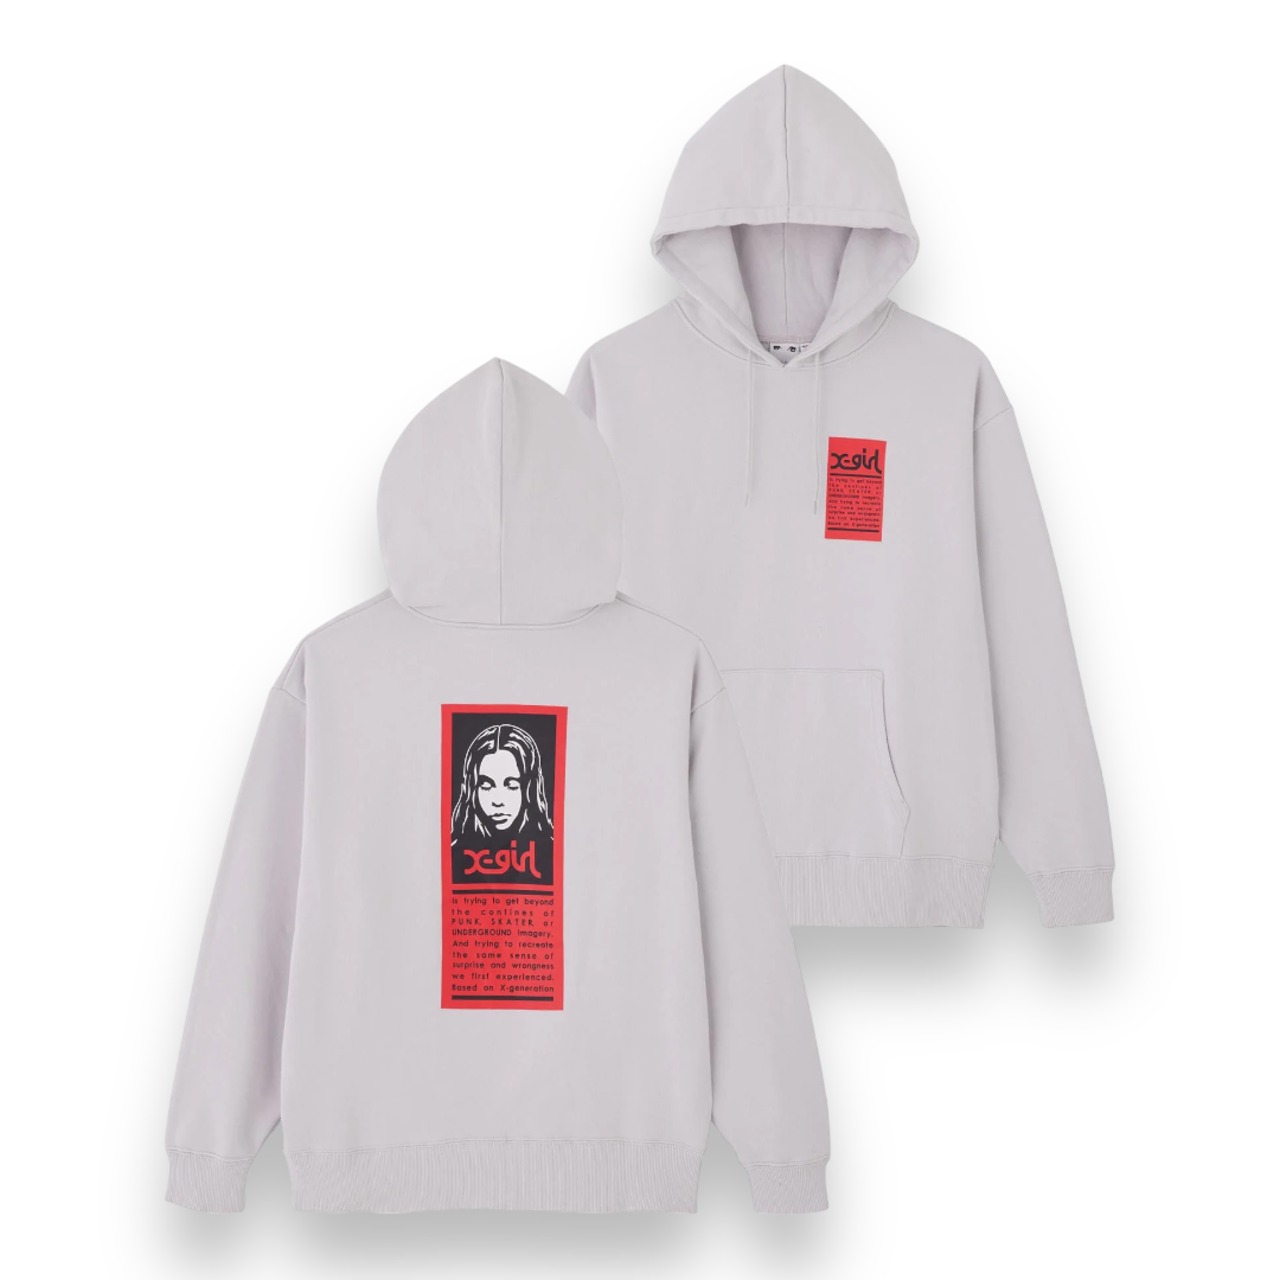 【X-girl】WORDS FACE SWEAT HOODIE  【エックスガール】